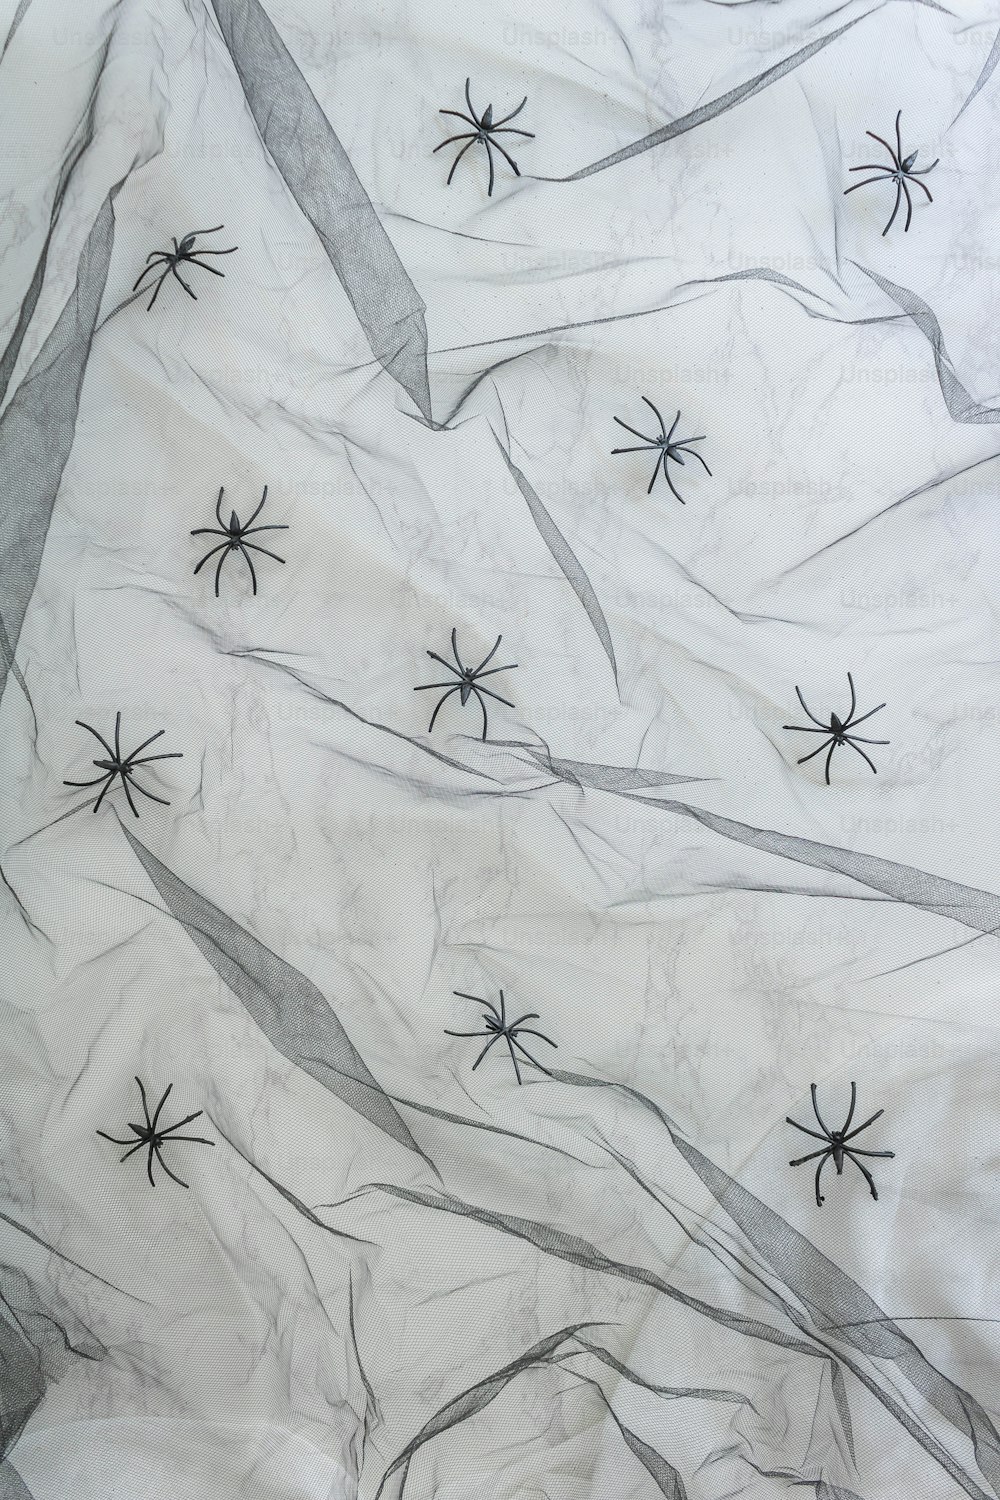 a drawing of spider webs on a sheet of paper